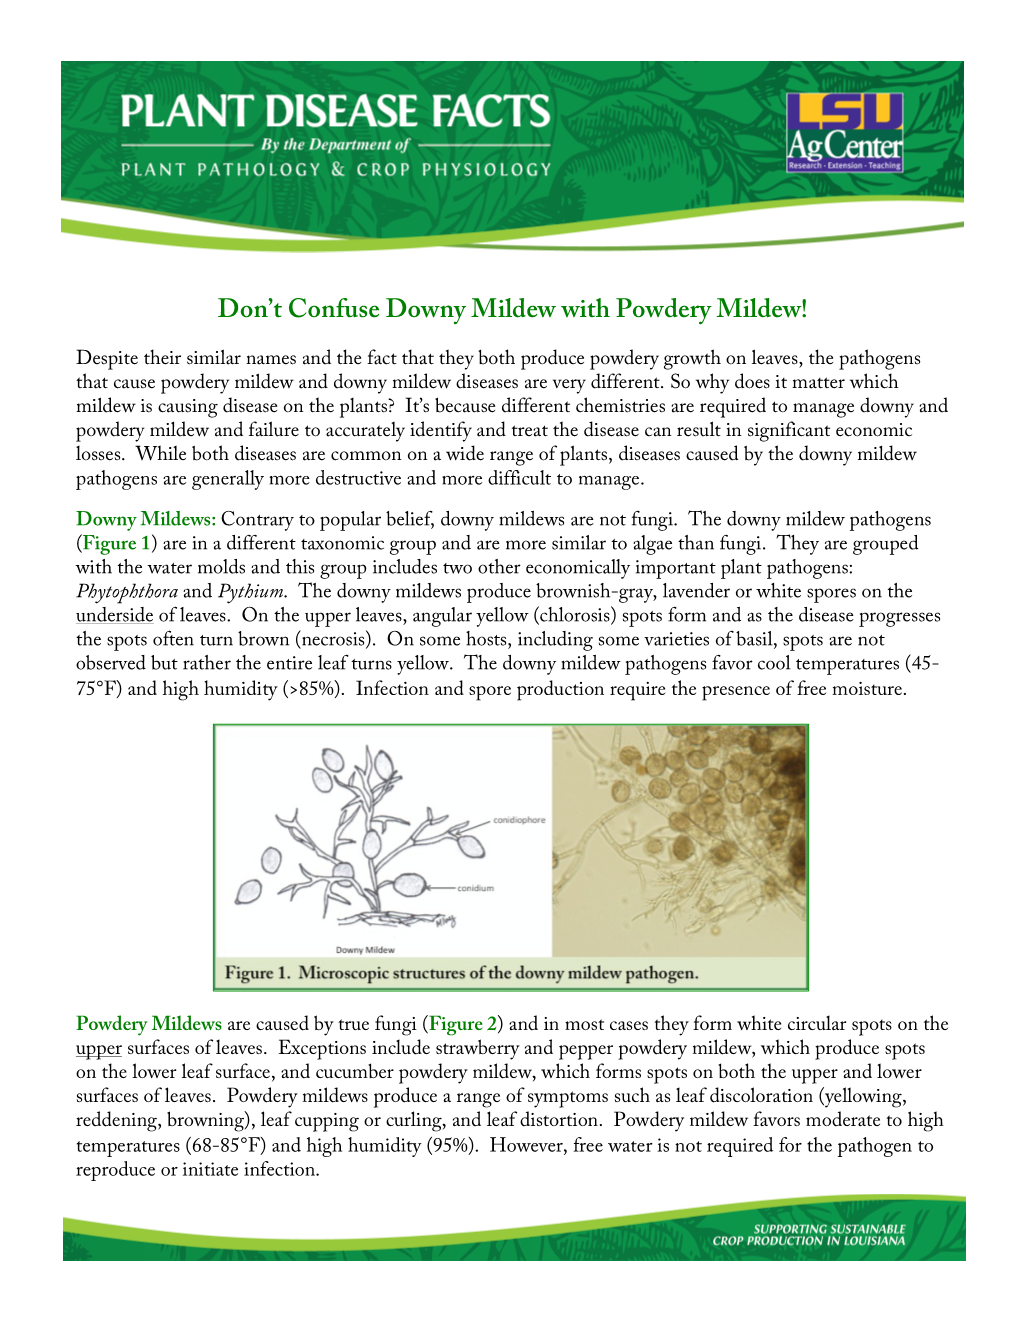 Don't Confuse Downy Mildew with Powdery Mildew PPCP-MISC-001